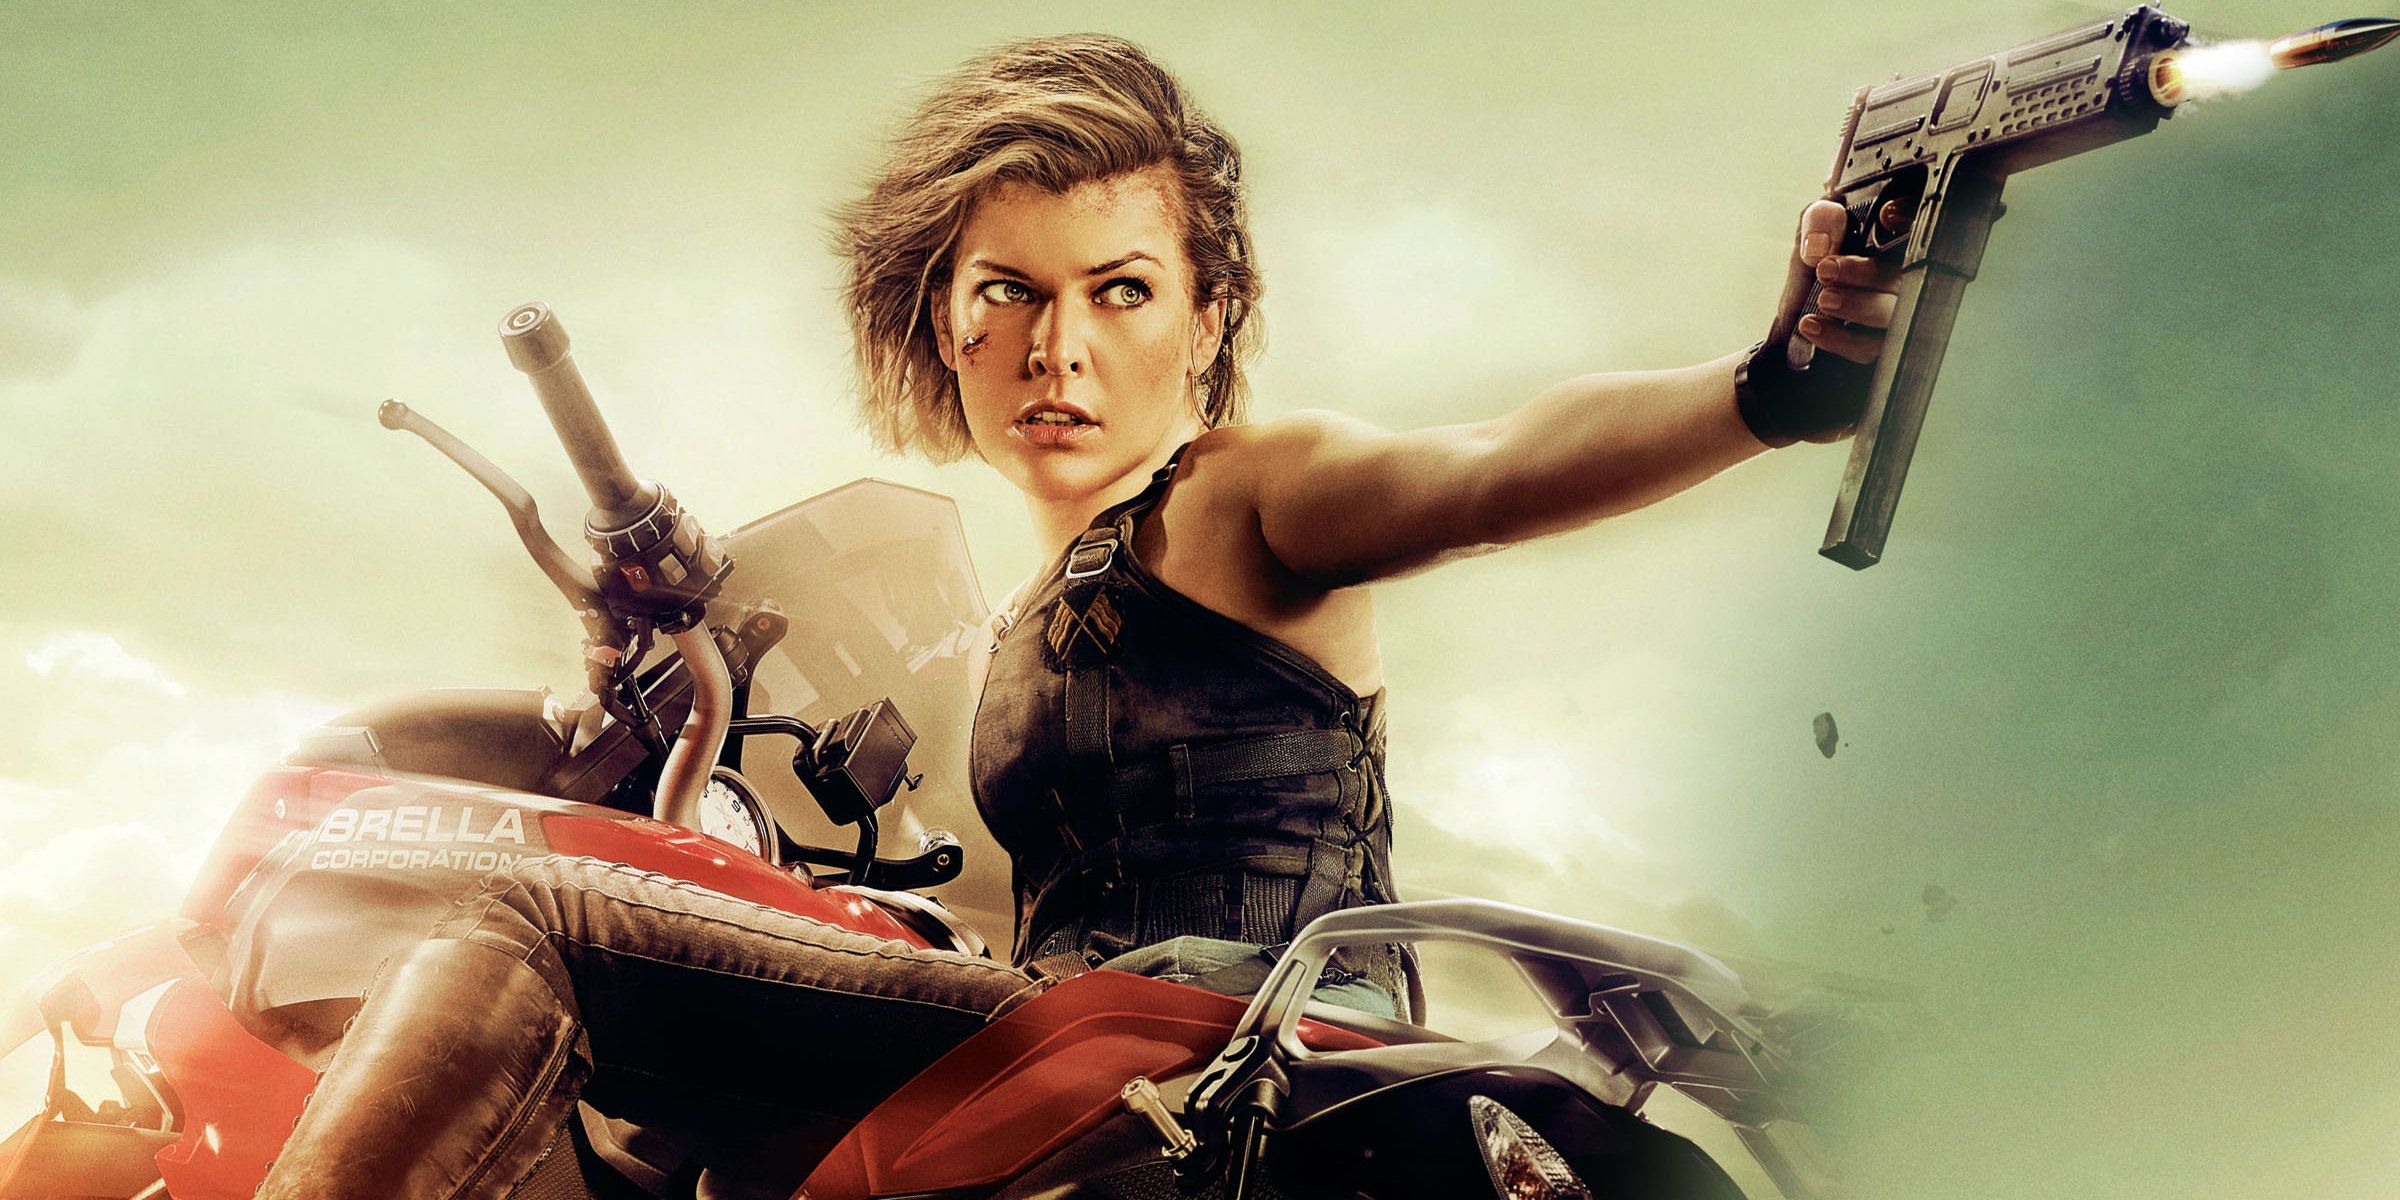 Resident Evil The Final Chapter movie review: Milla Jovovich provides  enough thrills to end the franchise on a high note - Bollywood News &  Gossip, Movie Reviews, Trailers & Videos at